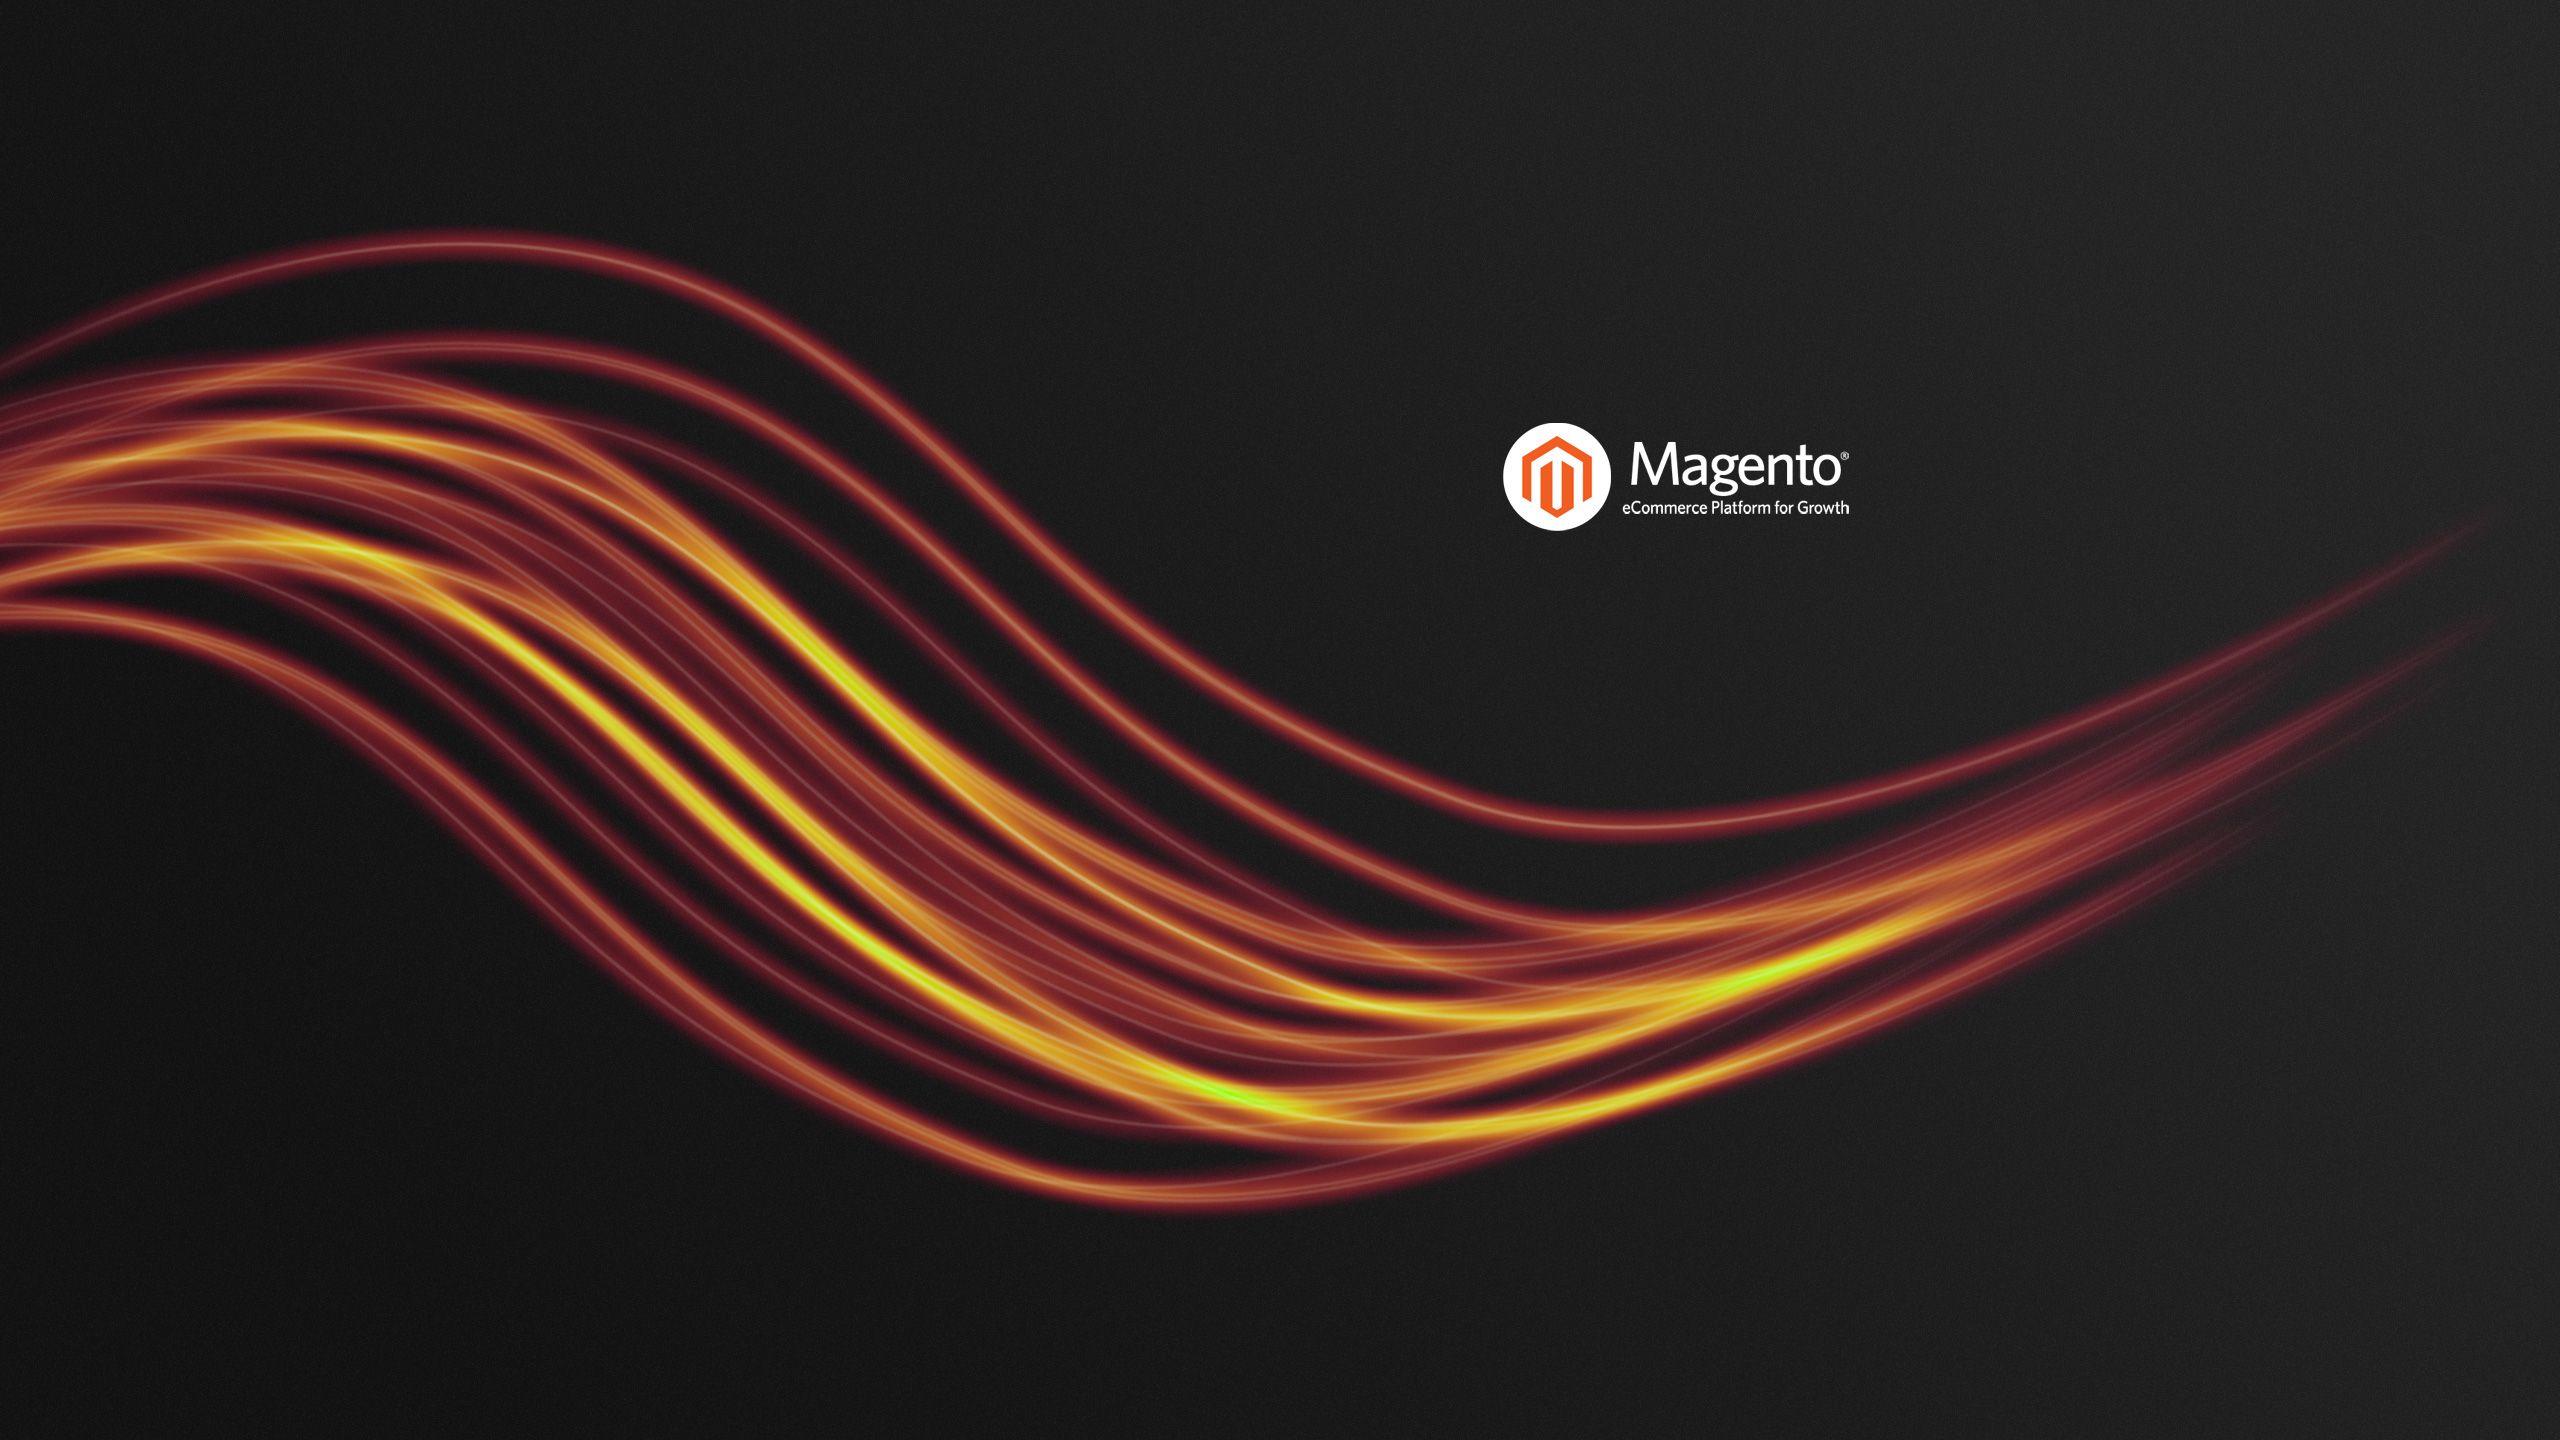 Magento wallpaper Abstract pack